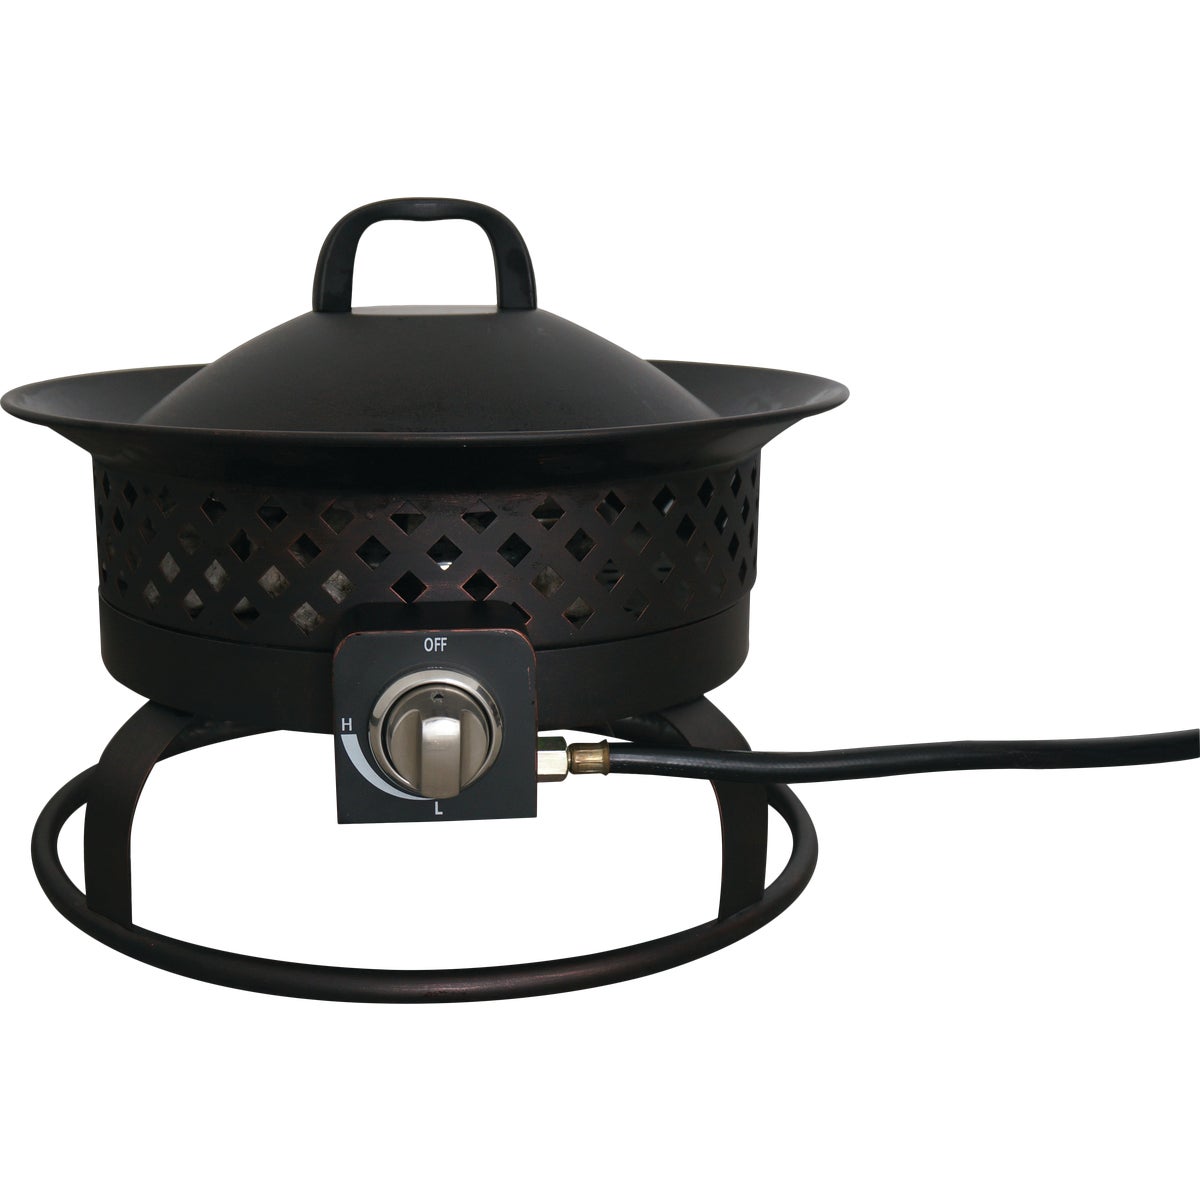 Item 801439, Portable gas fire pit features 50,000 BTU (British Thermal Unit), the 